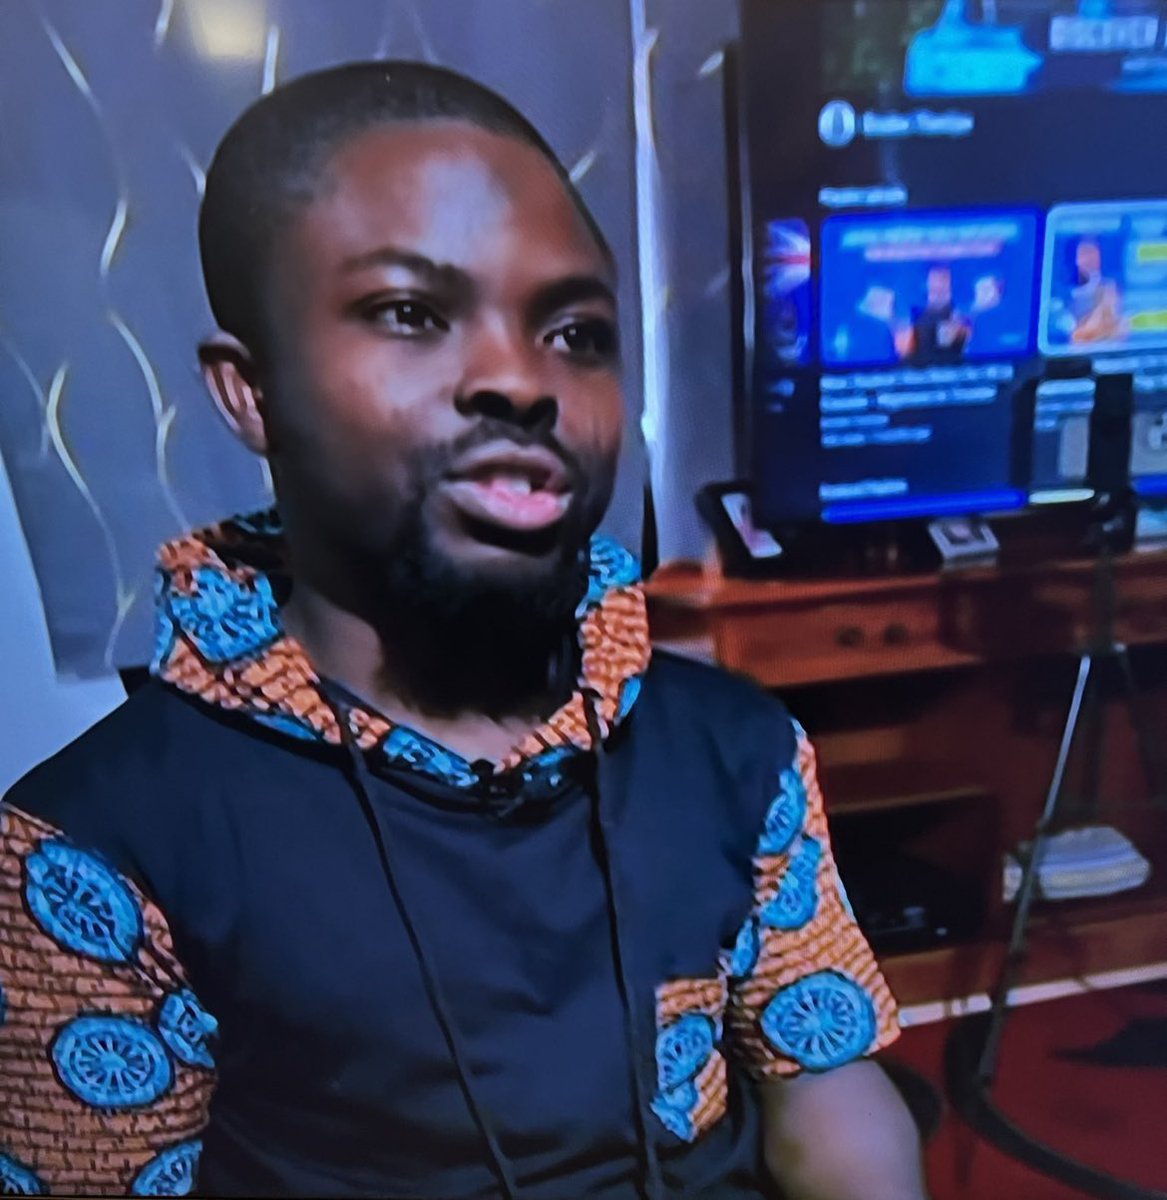 An amateur YouTuber from Tamale, Ghana named Emdee Kwame Tiamiyu told the BBC, in an interview that ALL Nigerians moving to the UK via Student visa are not interested in studying. That student visas are used by 🇳🇬s to get away from poverty #UKStudentVisa #Tiamiyu #BBC